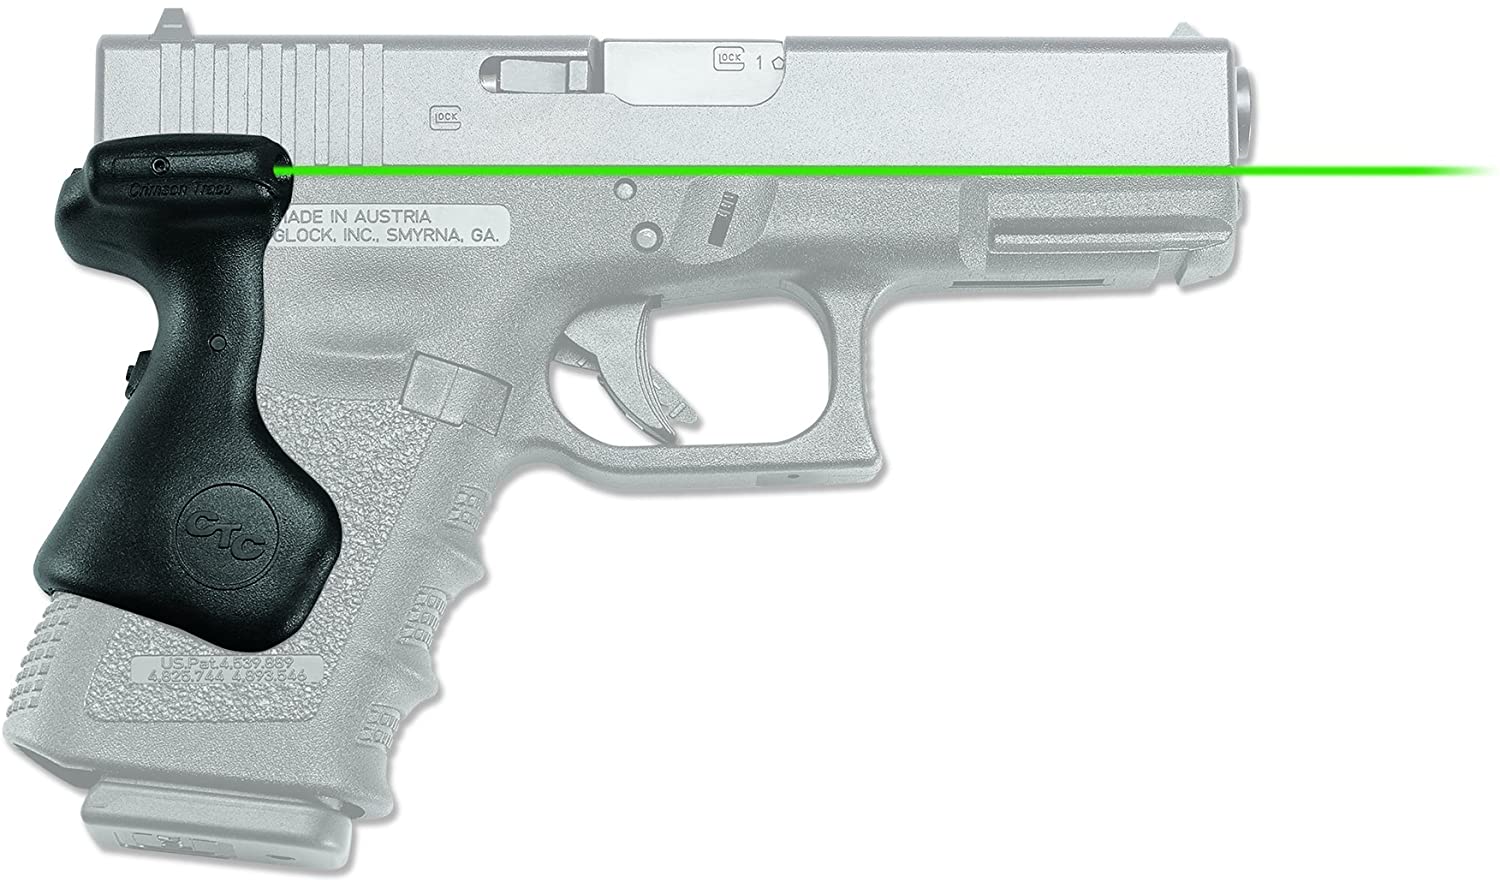 Crimson Trace LG-639G for Glock Gen 3, 4, or 5 Compact